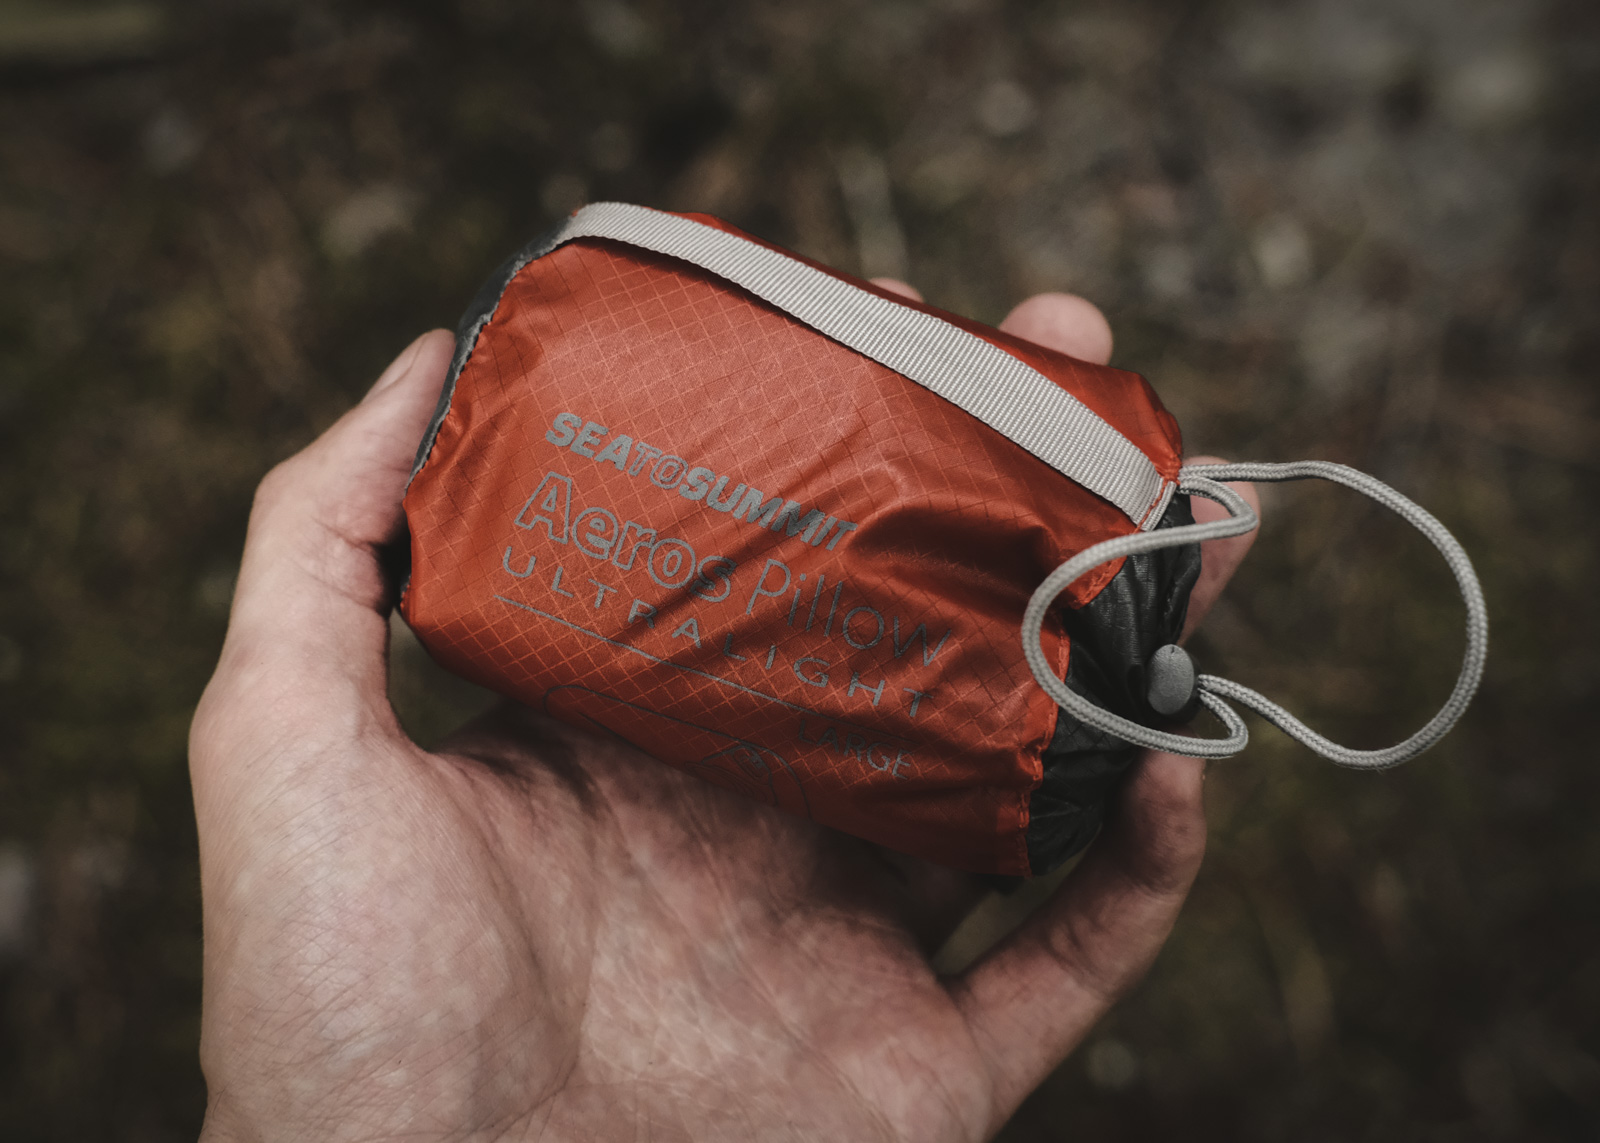 Sea To Summit Aeros Pillow Ultralight Review